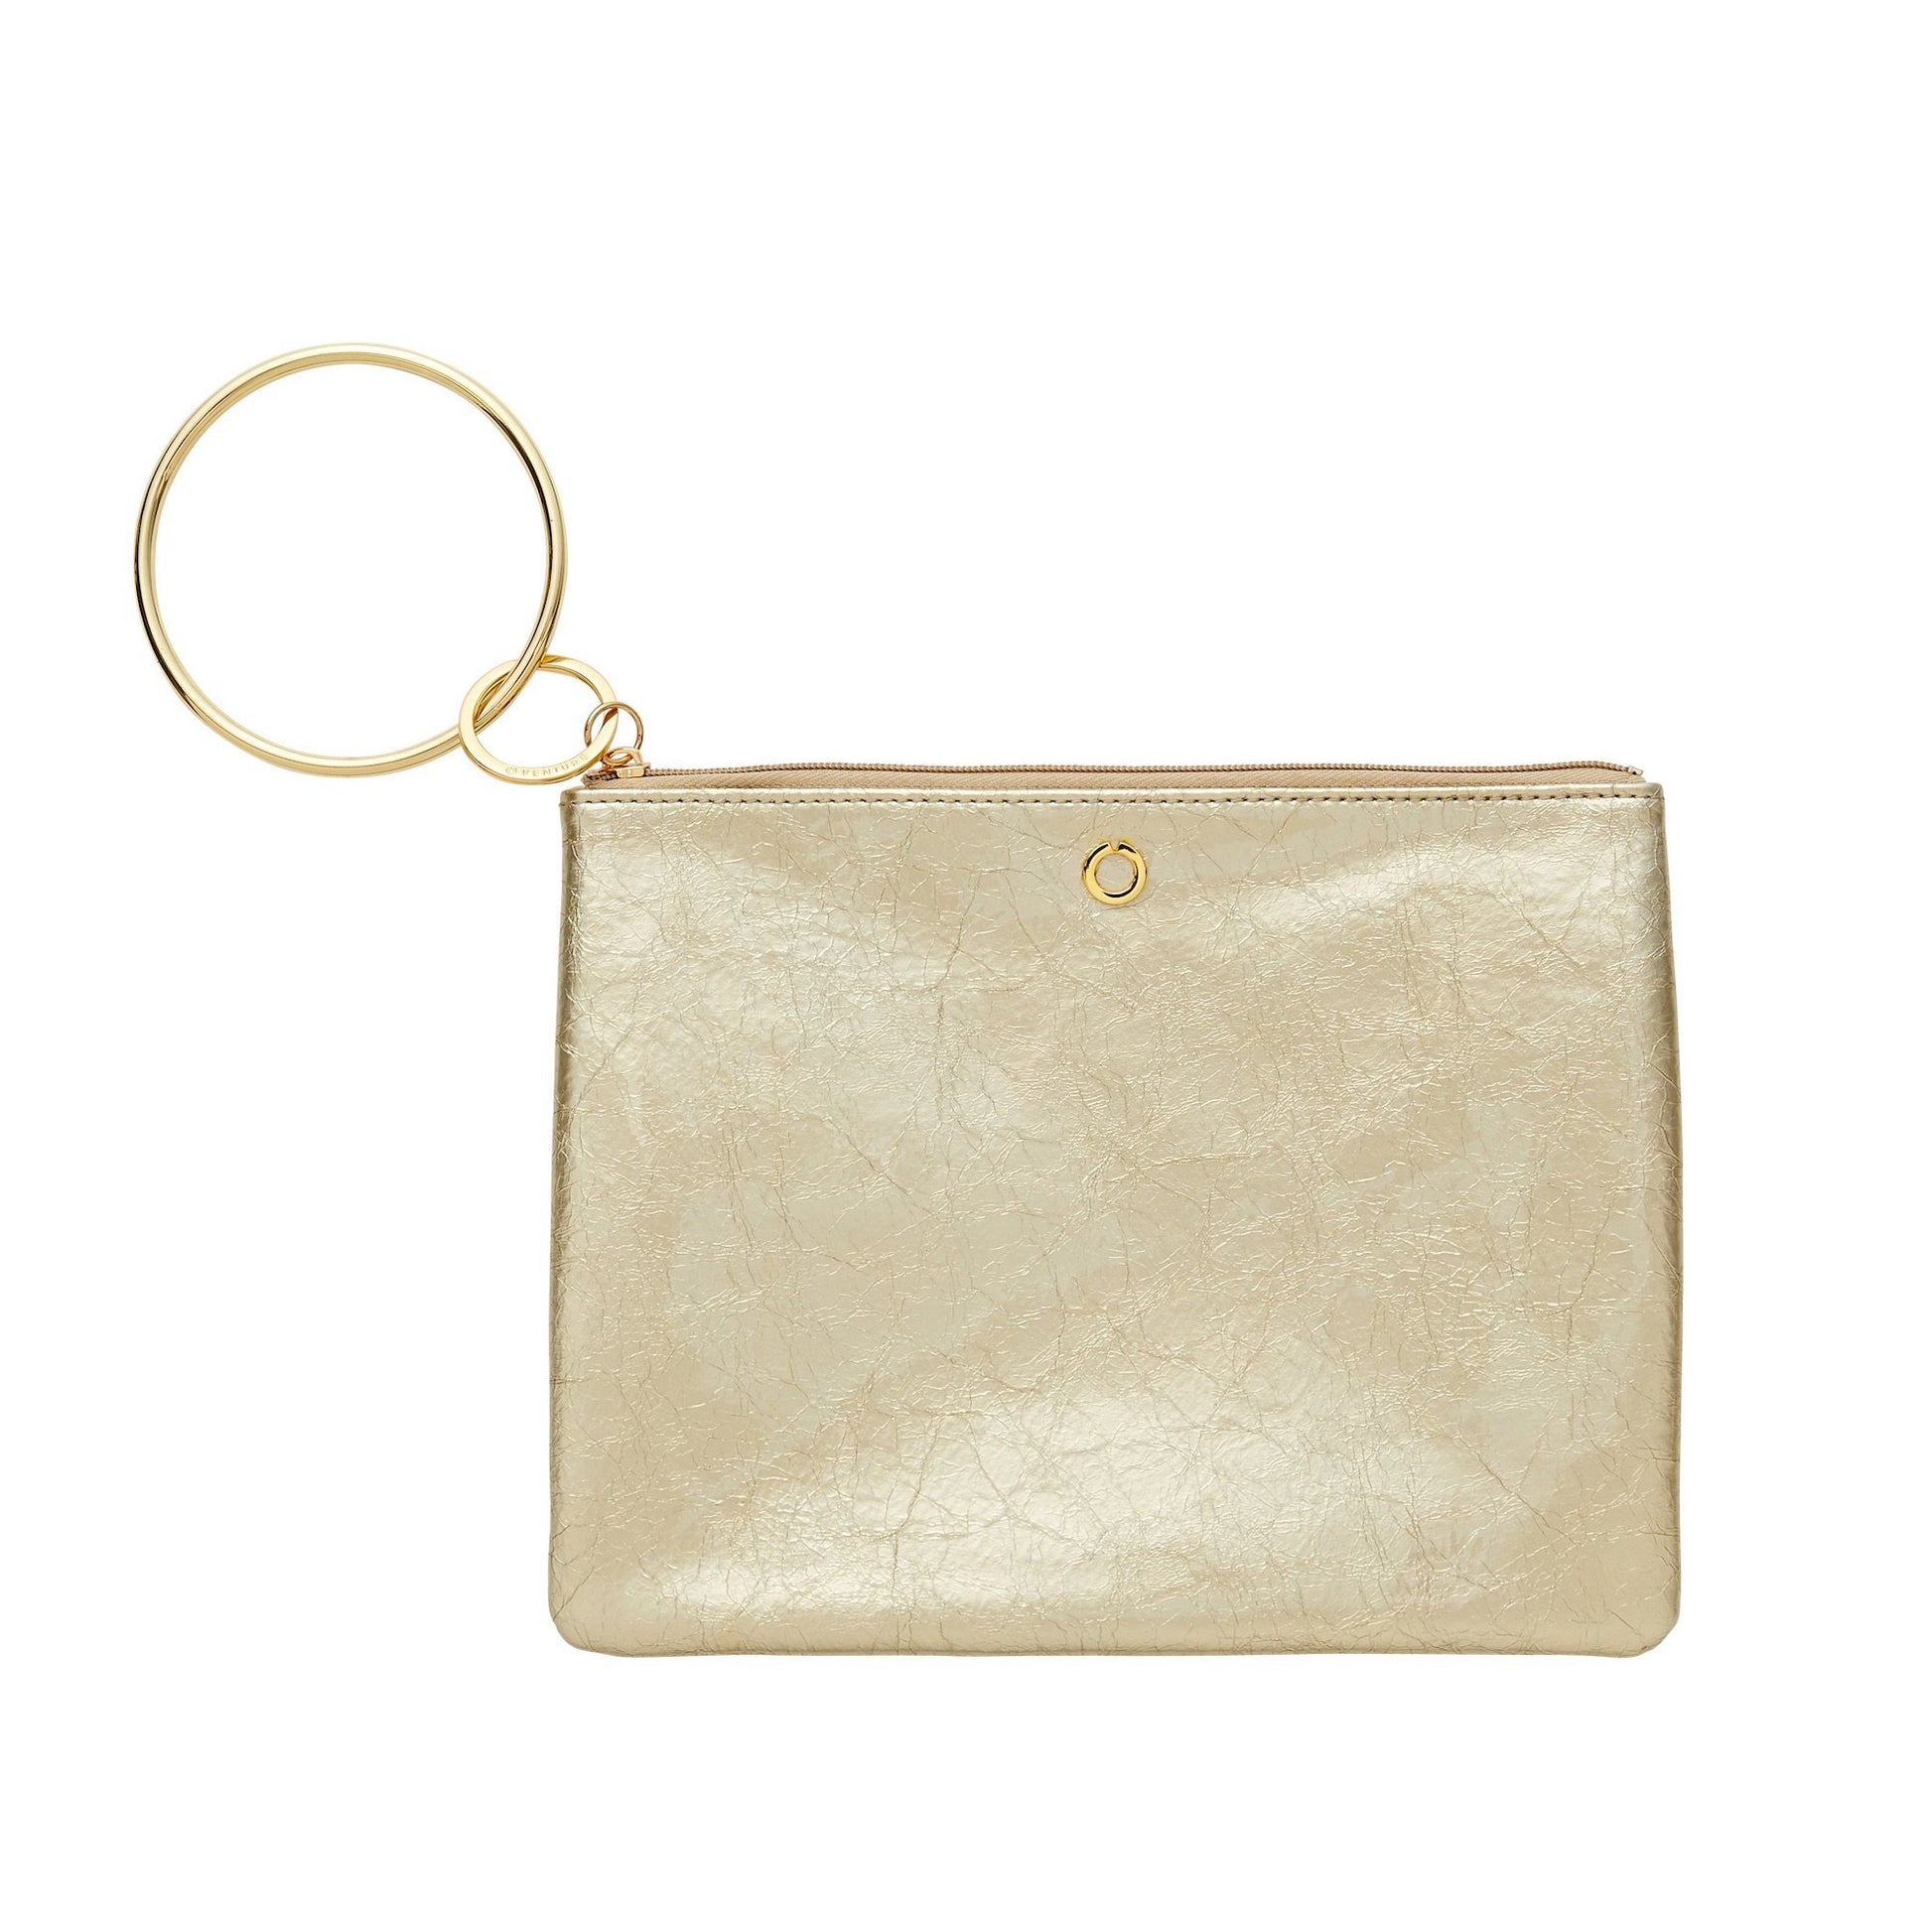 Gold Patent Leather bracelet pouch with metal gold key ring attached